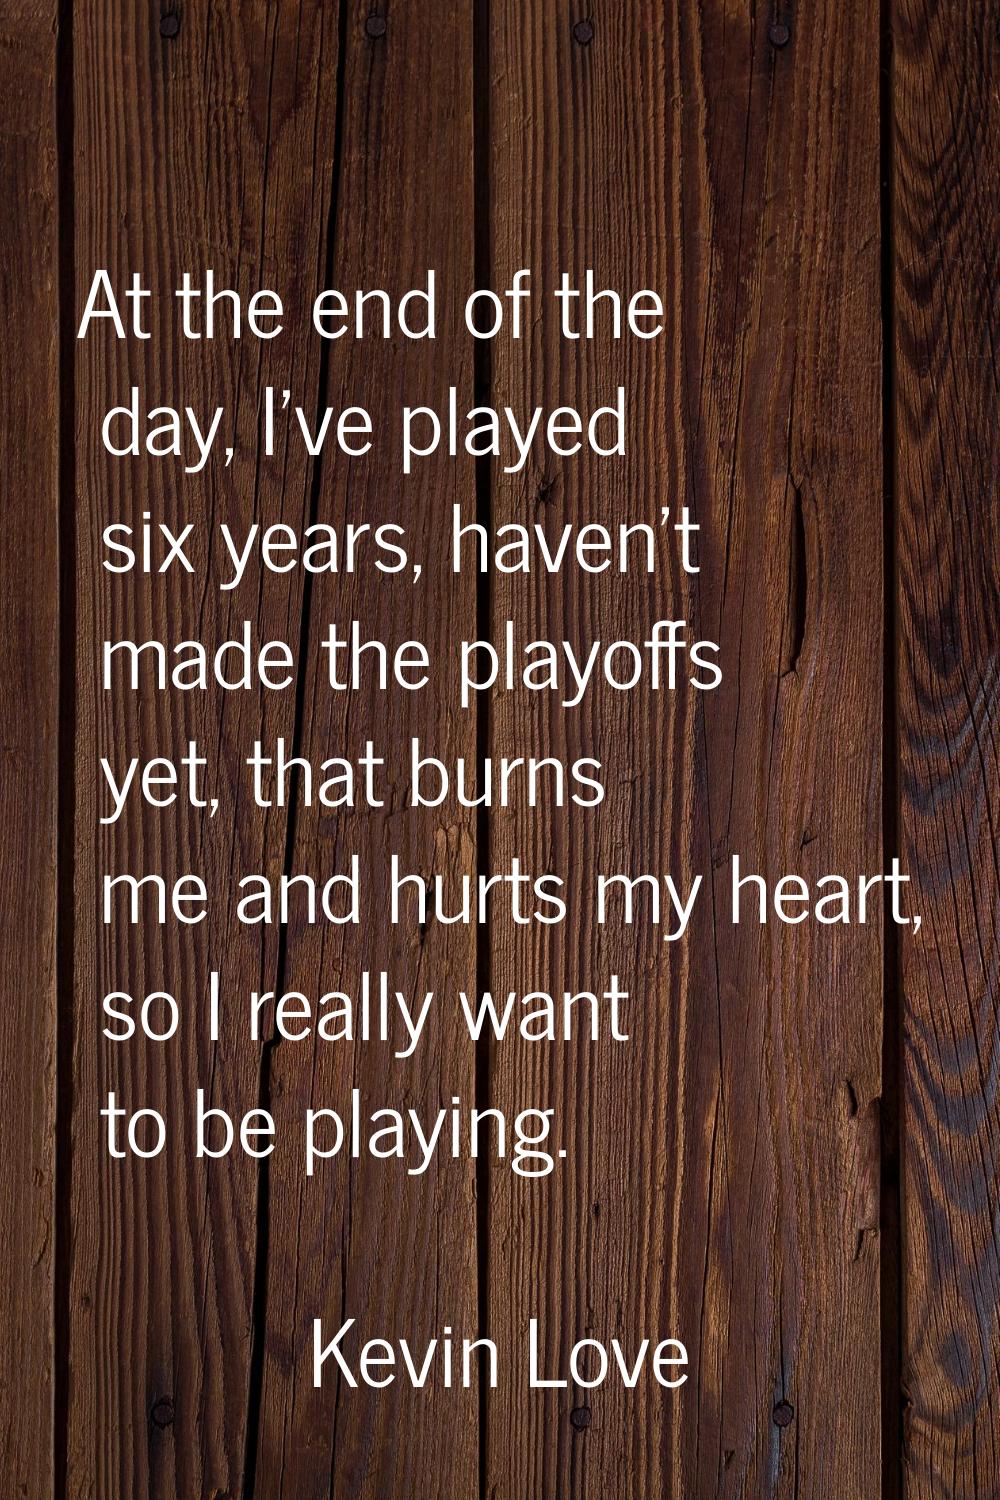 At the end of the day, I've played six years, haven't made the playoffs yet, that burns me and hurt